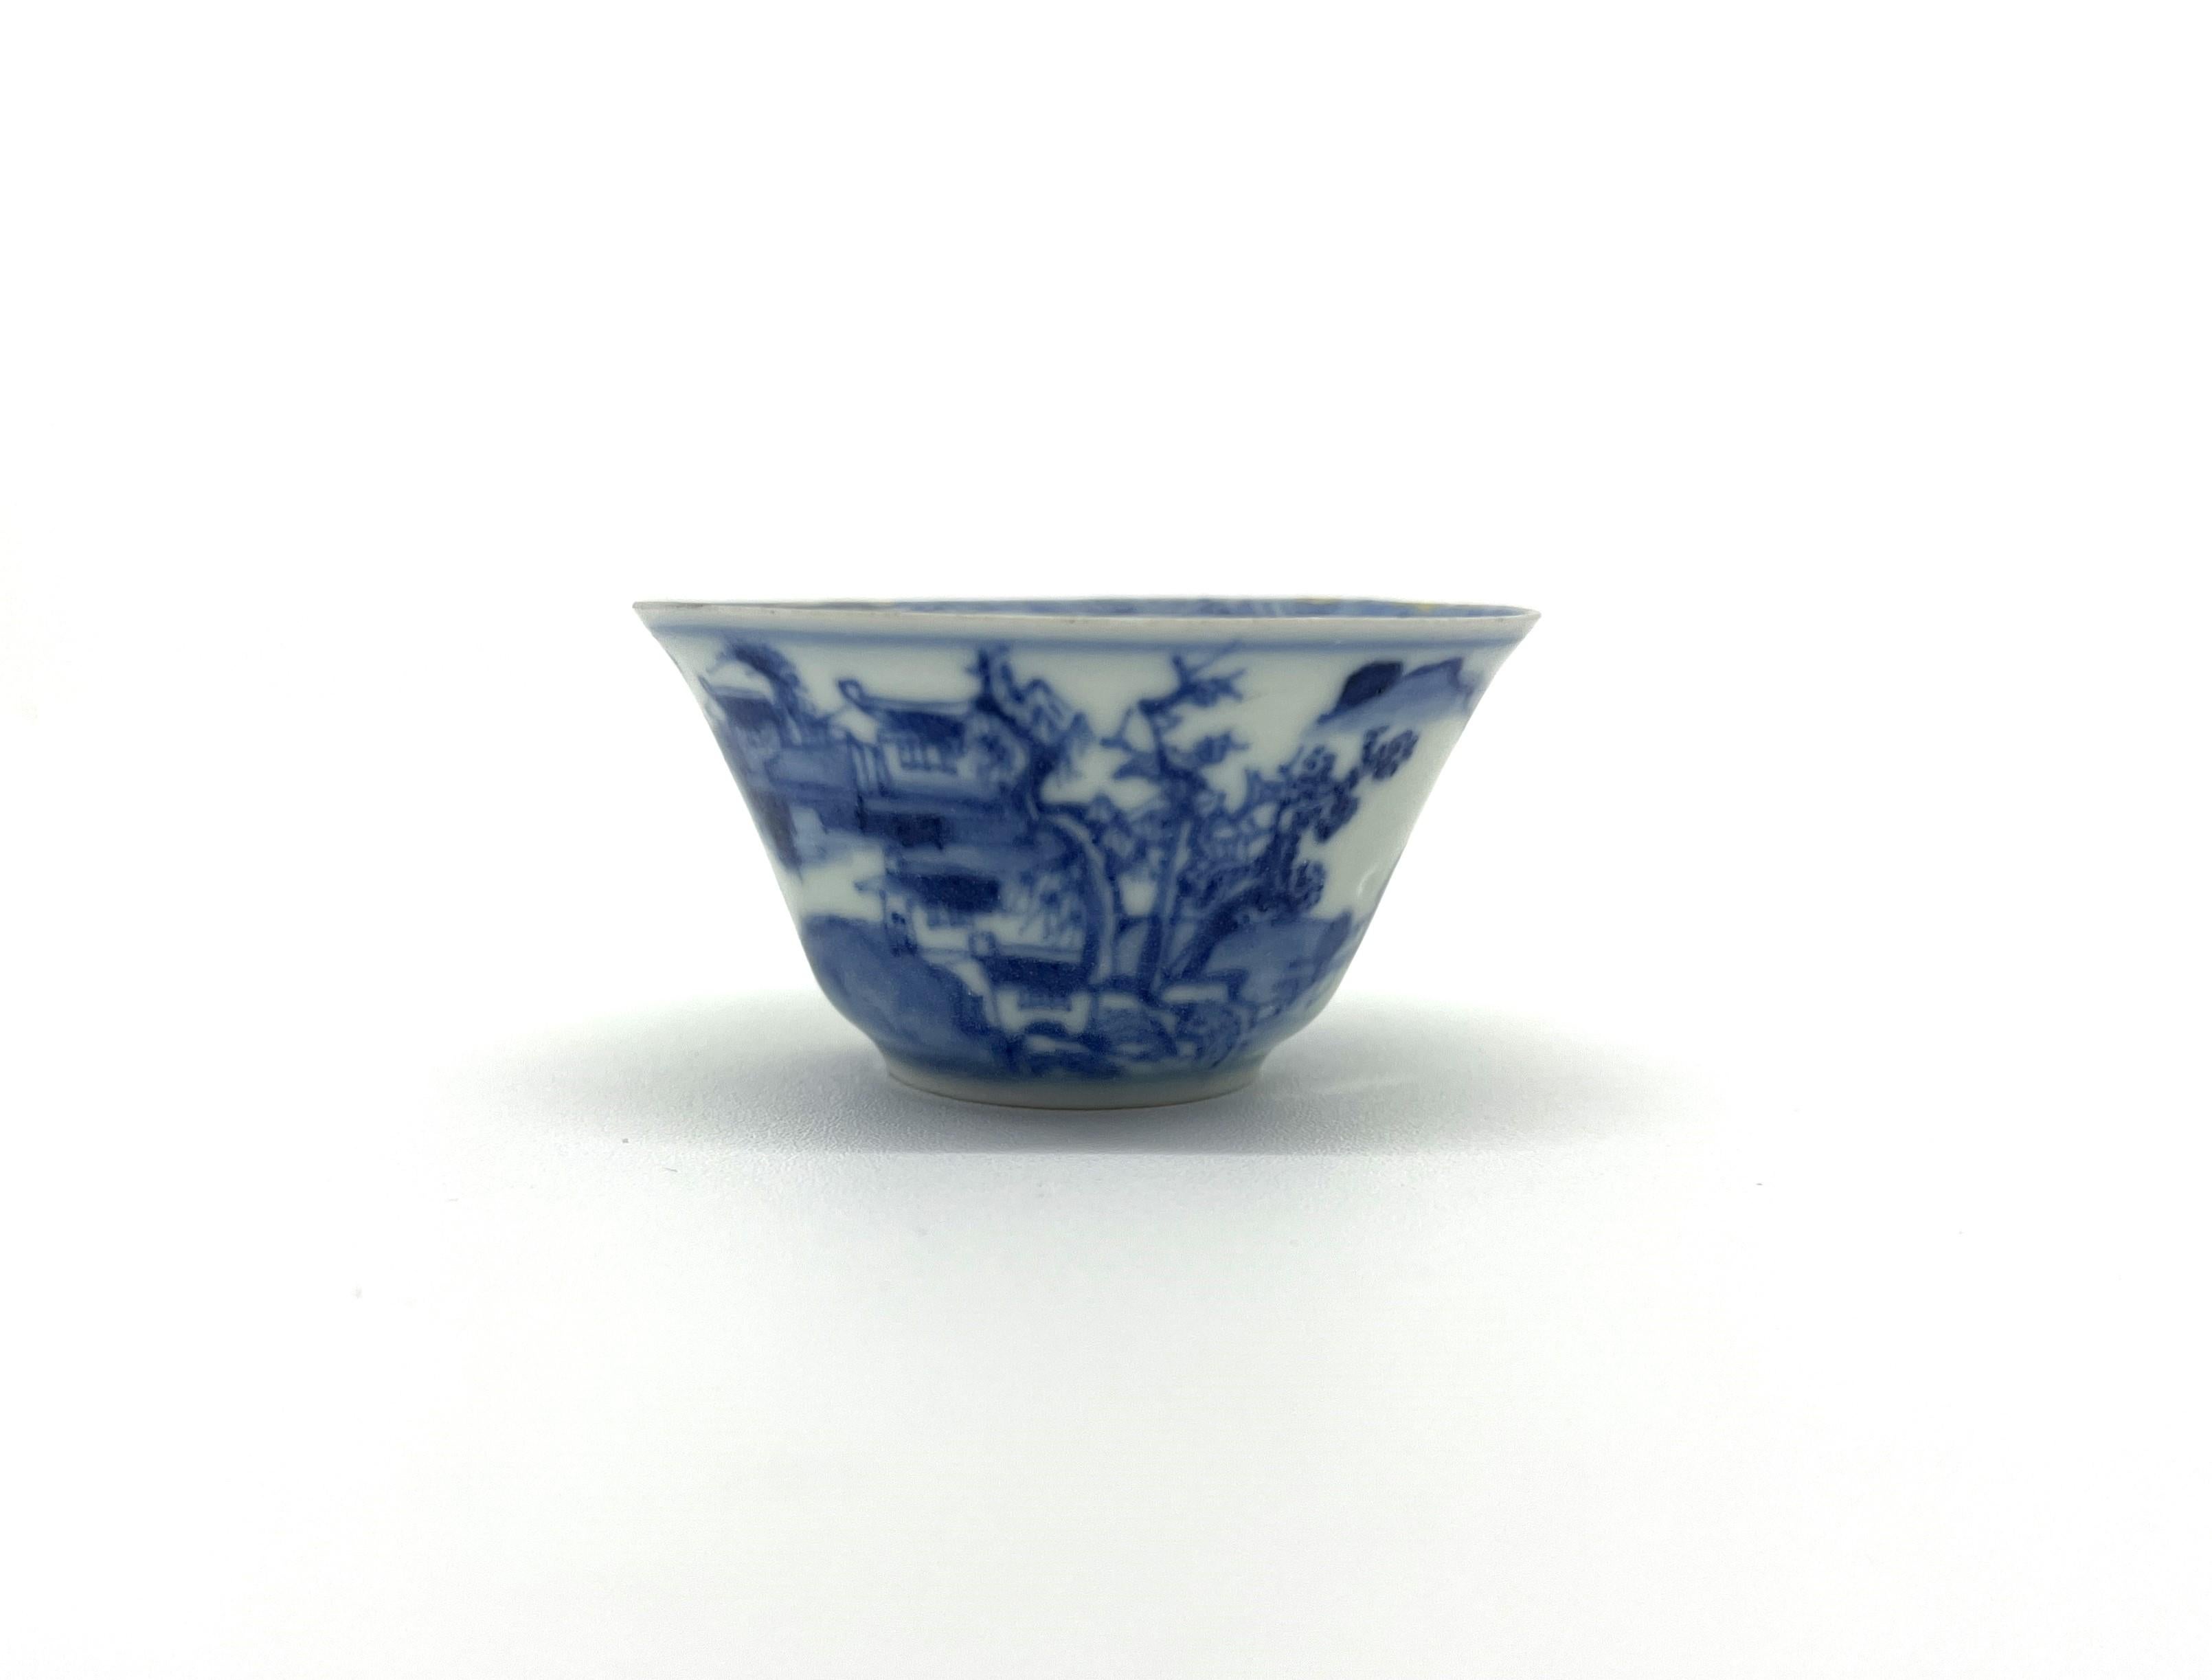 Scene with multiple figures on a boat, which is a common theme in Chinese porcelain, reflecting the cultural and economic importance of sea travel and trade in Chinese history. The figures may represent traders, fishermen, or even scenes from